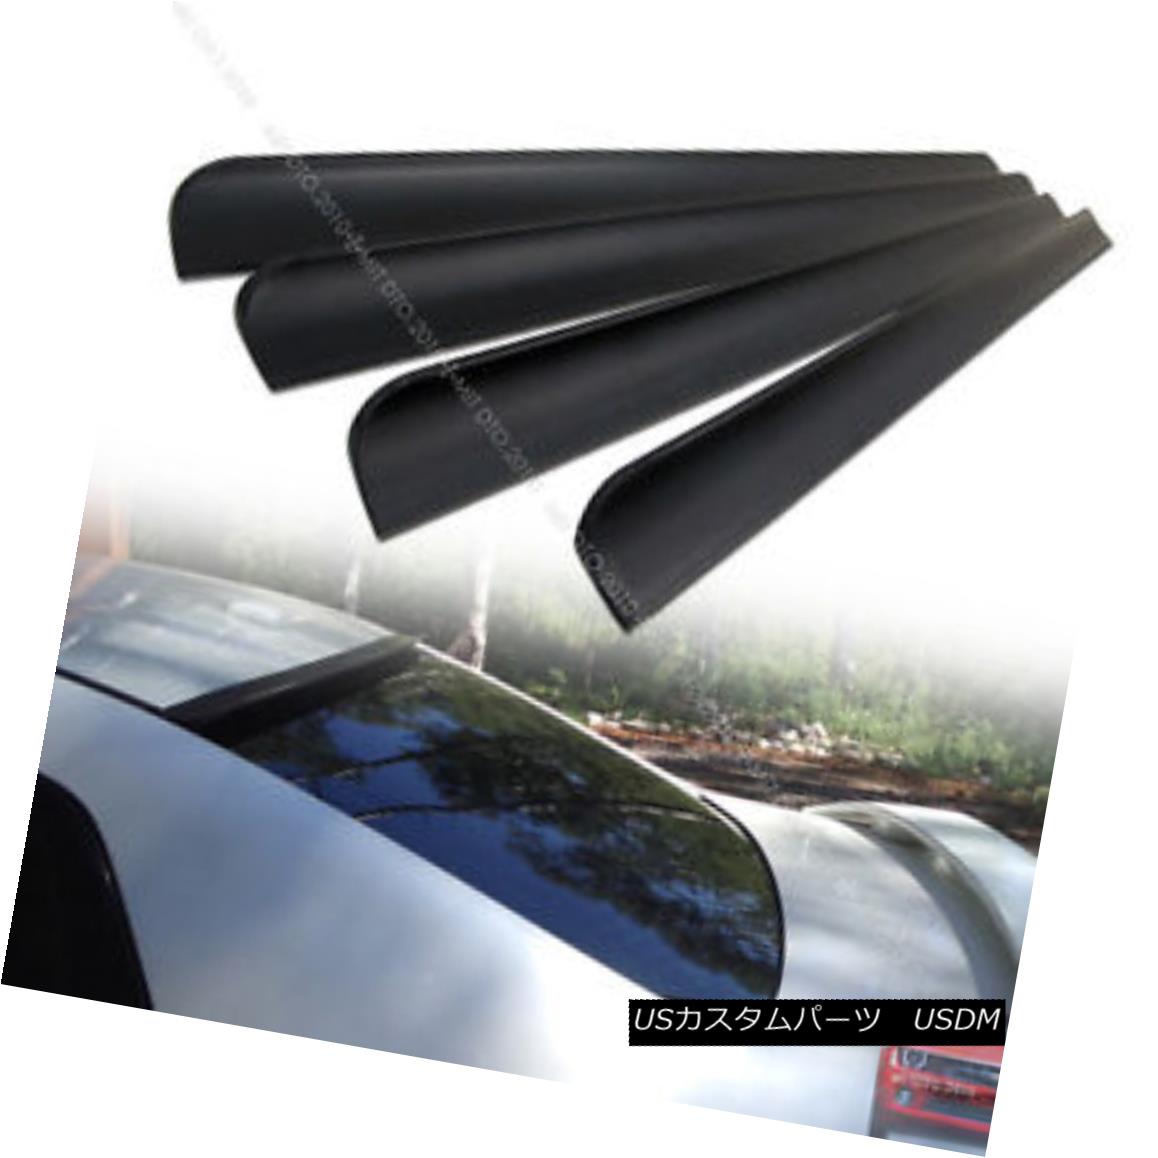 ѡ UNPAINTED PUF FOR BMW 4-Series F36 Gran Coupe Rear Roof Spoiler Wing 420i 435i  BMW 4꡼F36󥯡ڥꥢ롼եݥ顼420i 435i UN̵PUF